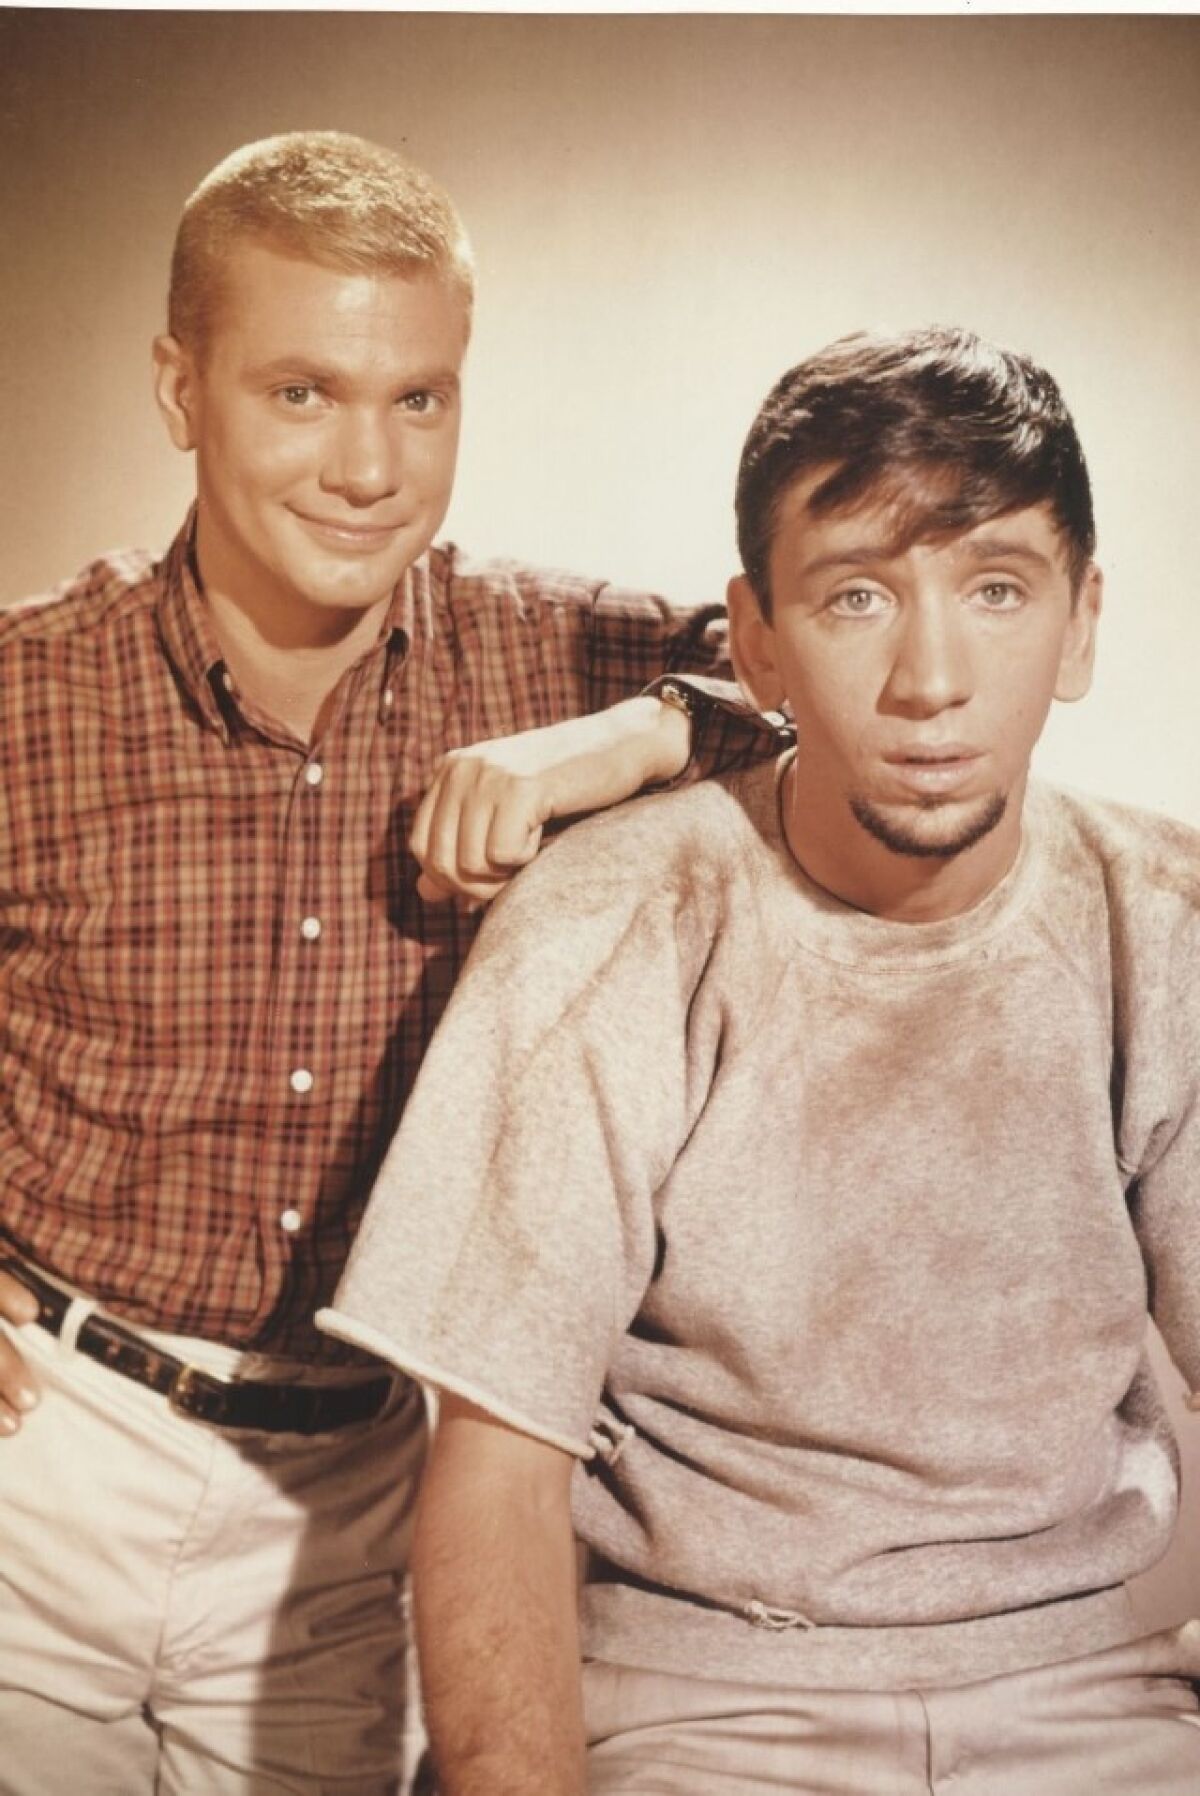 A sepia image of a young man resting his arm on another young man's shoulder.